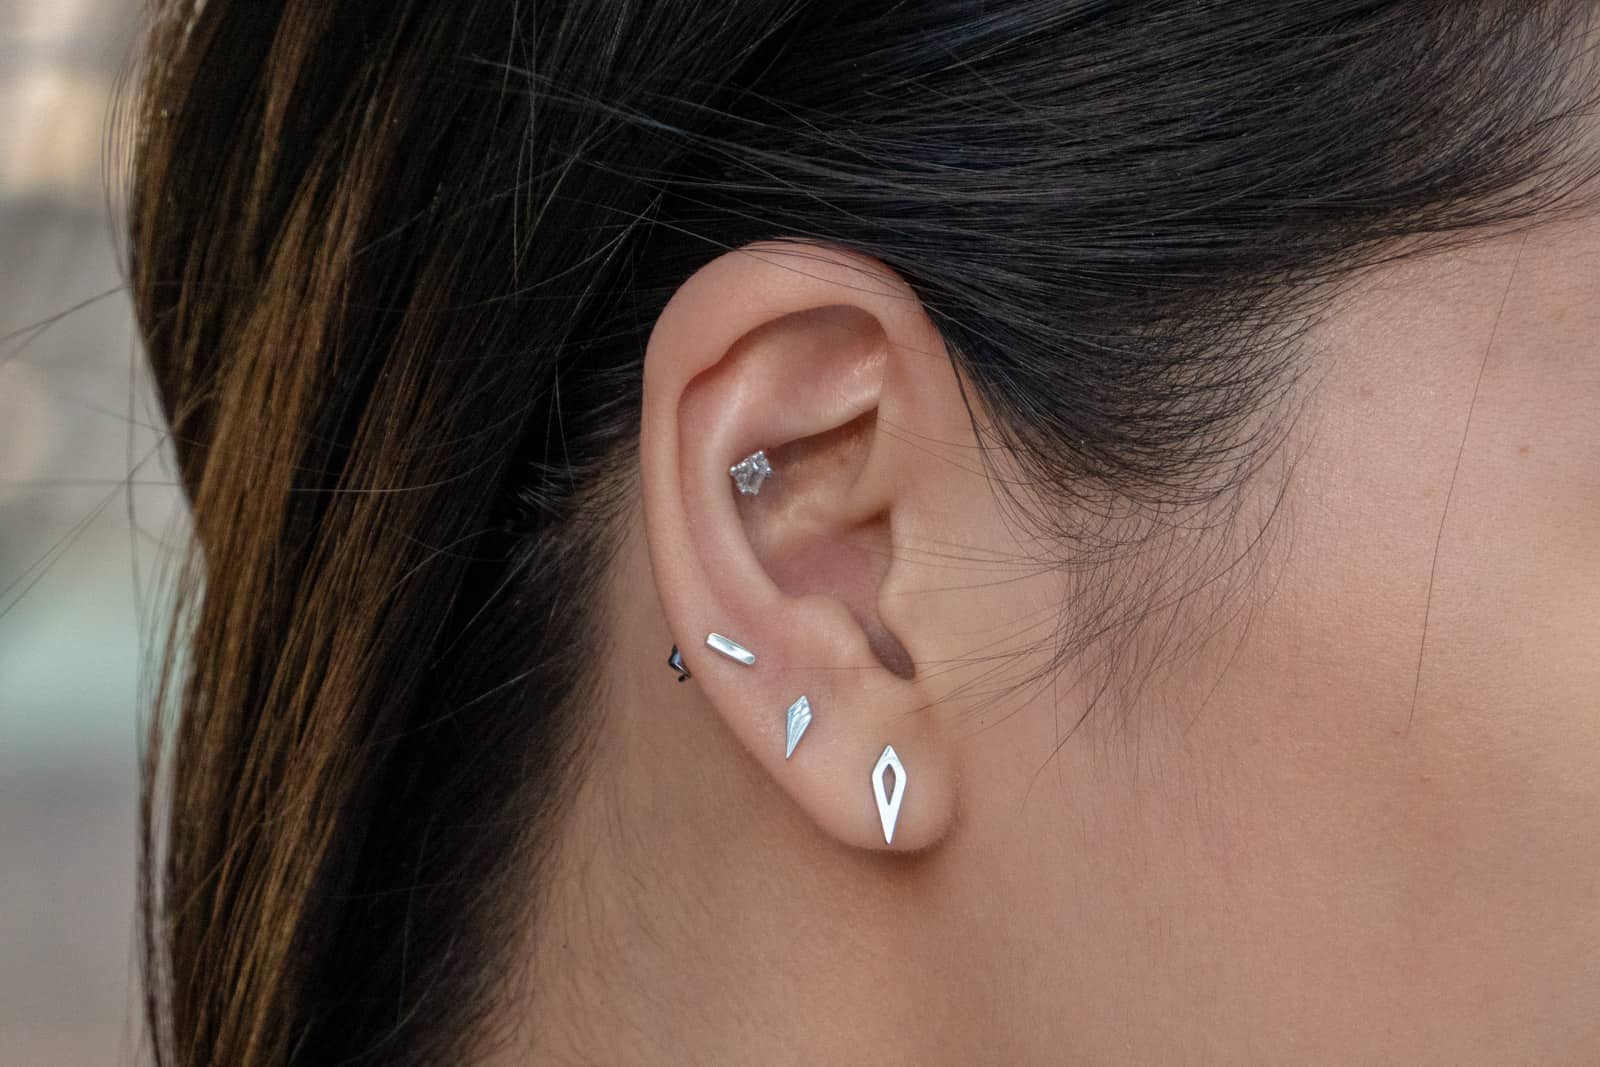 Close up of a woman’s ear with three small silver lobe earrings and one small cartilage piercing.